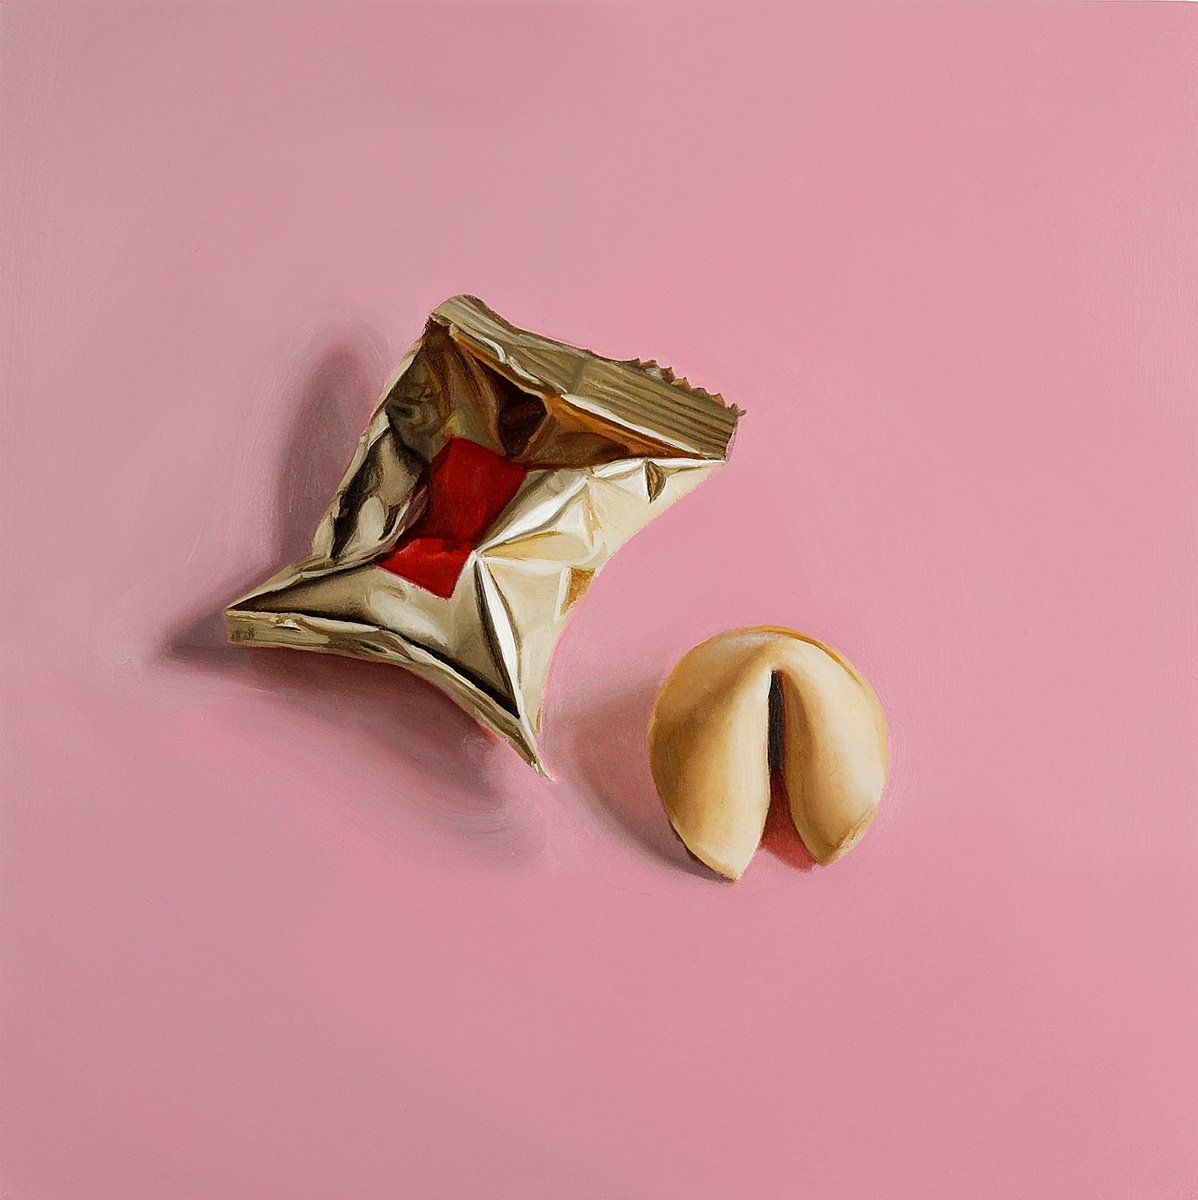 Fortune Cookie by Louis Savage